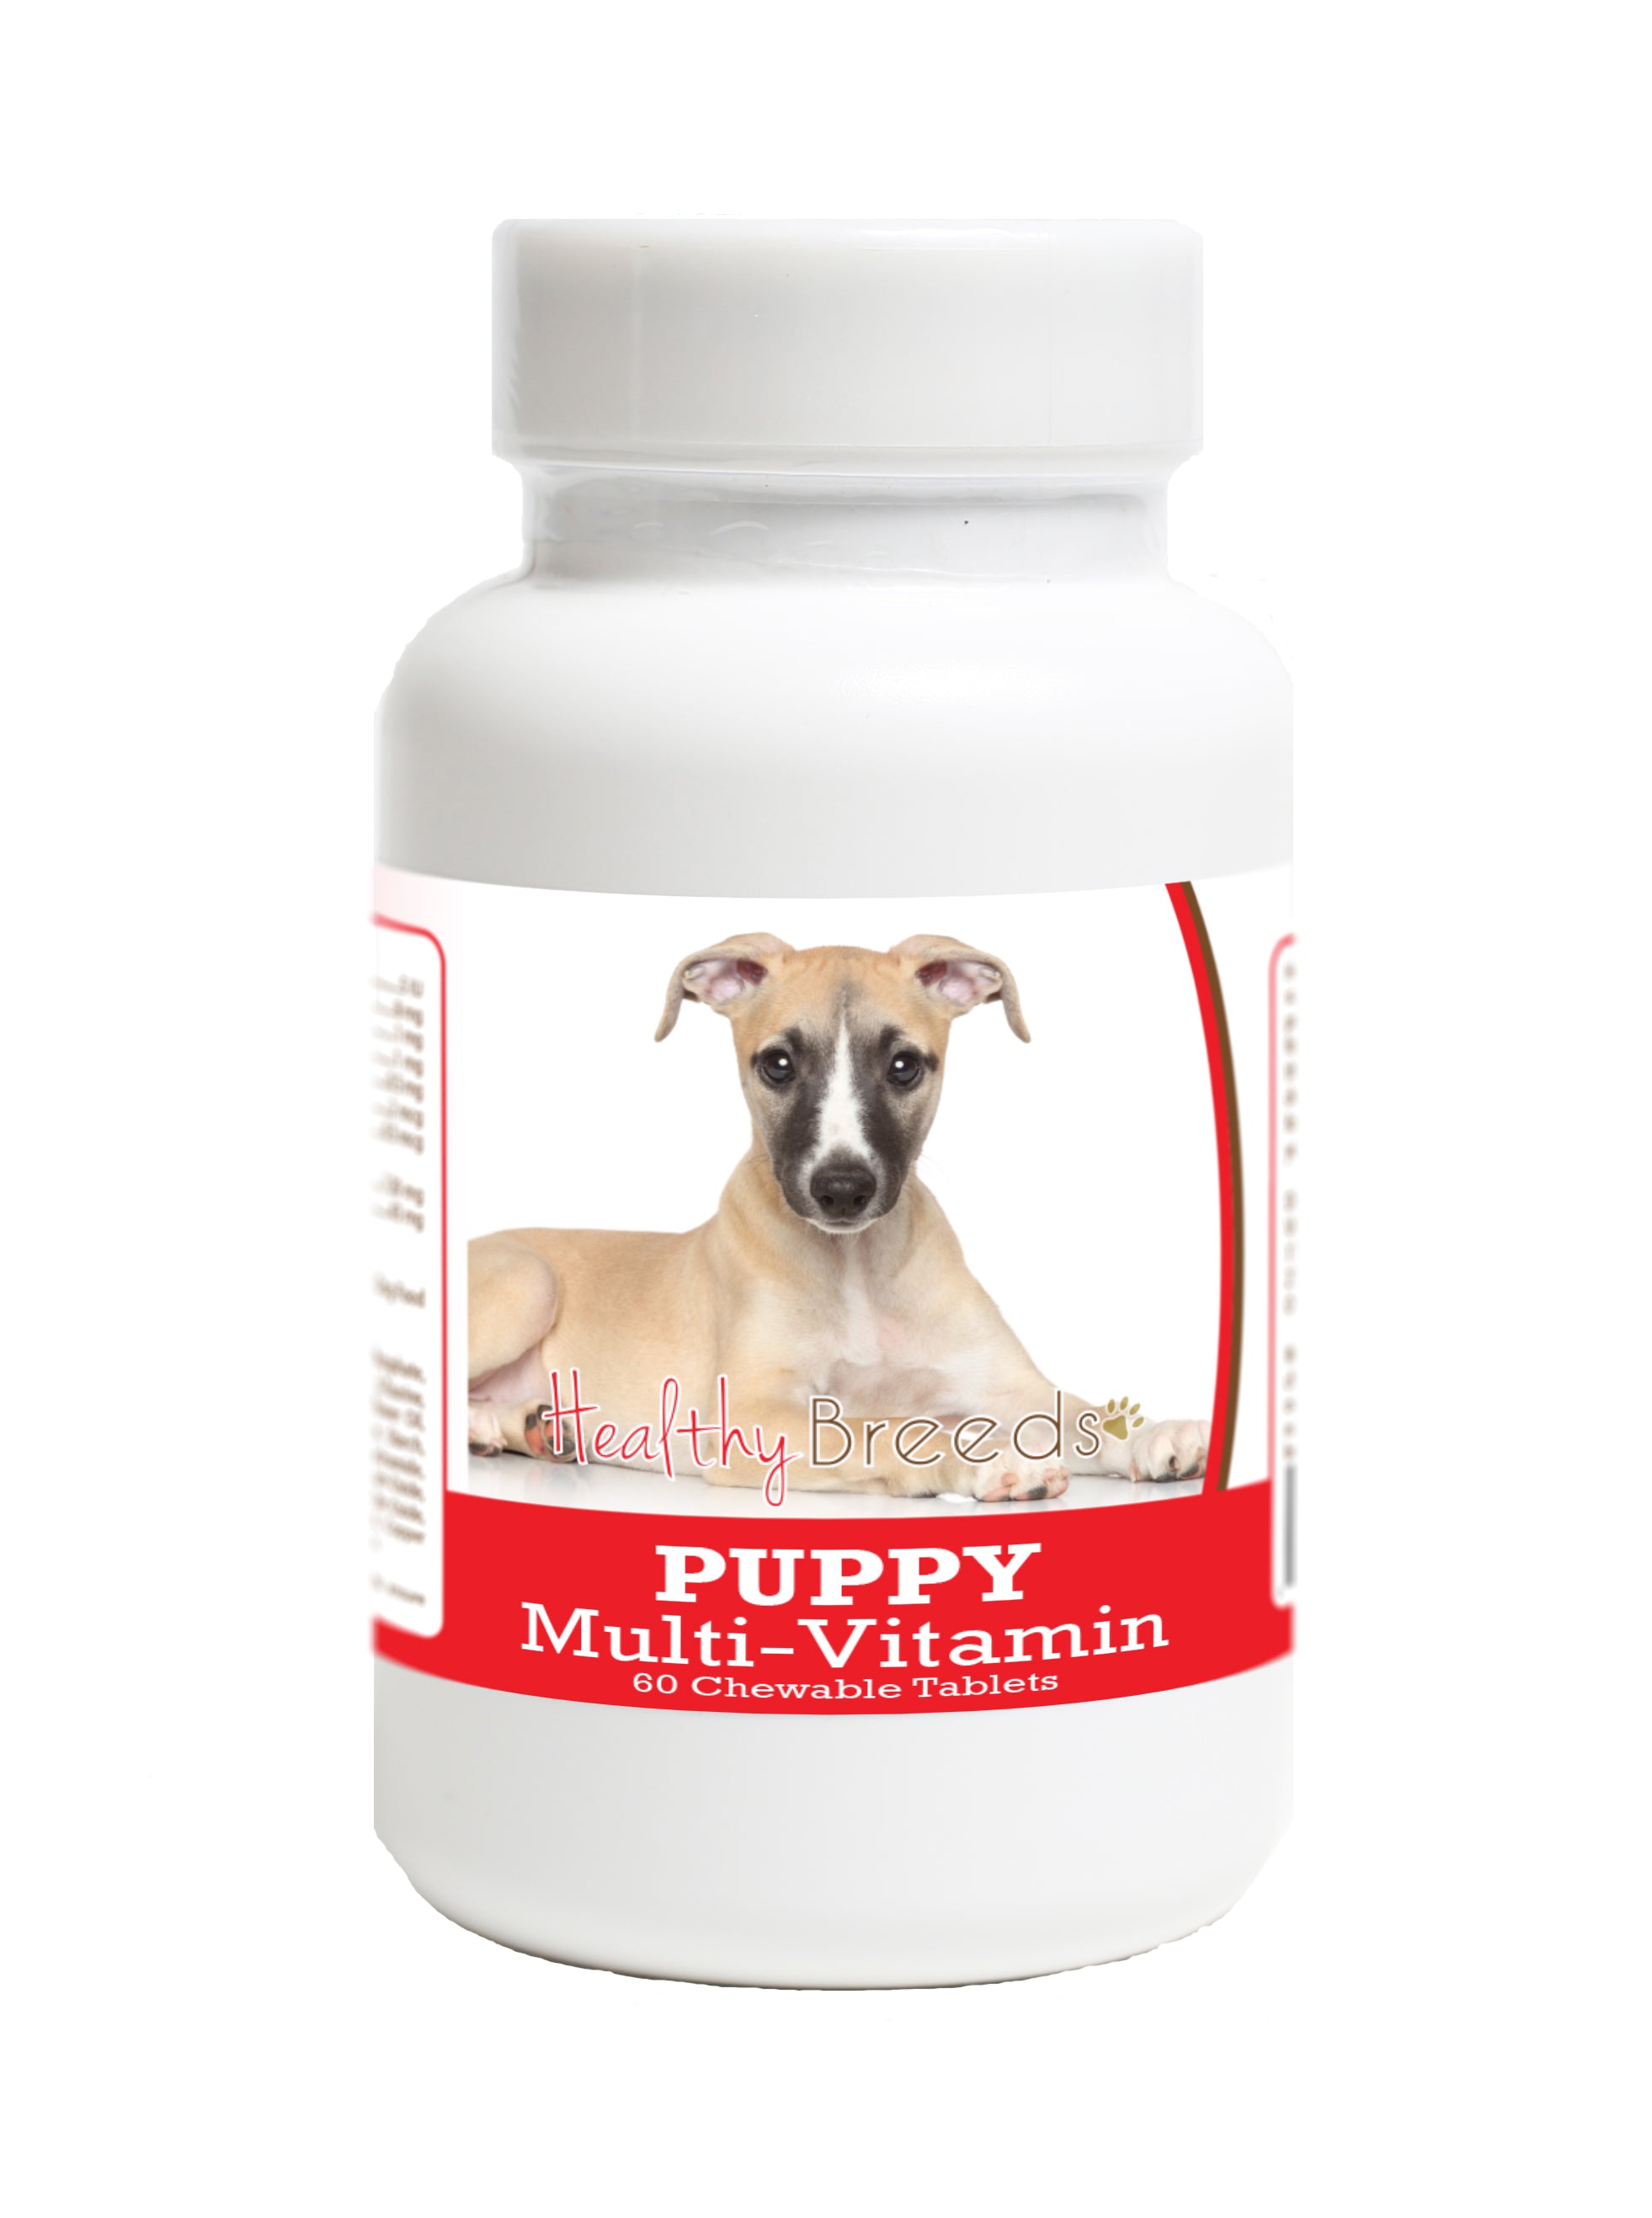 Whippet Puppy Dog Multivitamin Tablet 60 Count